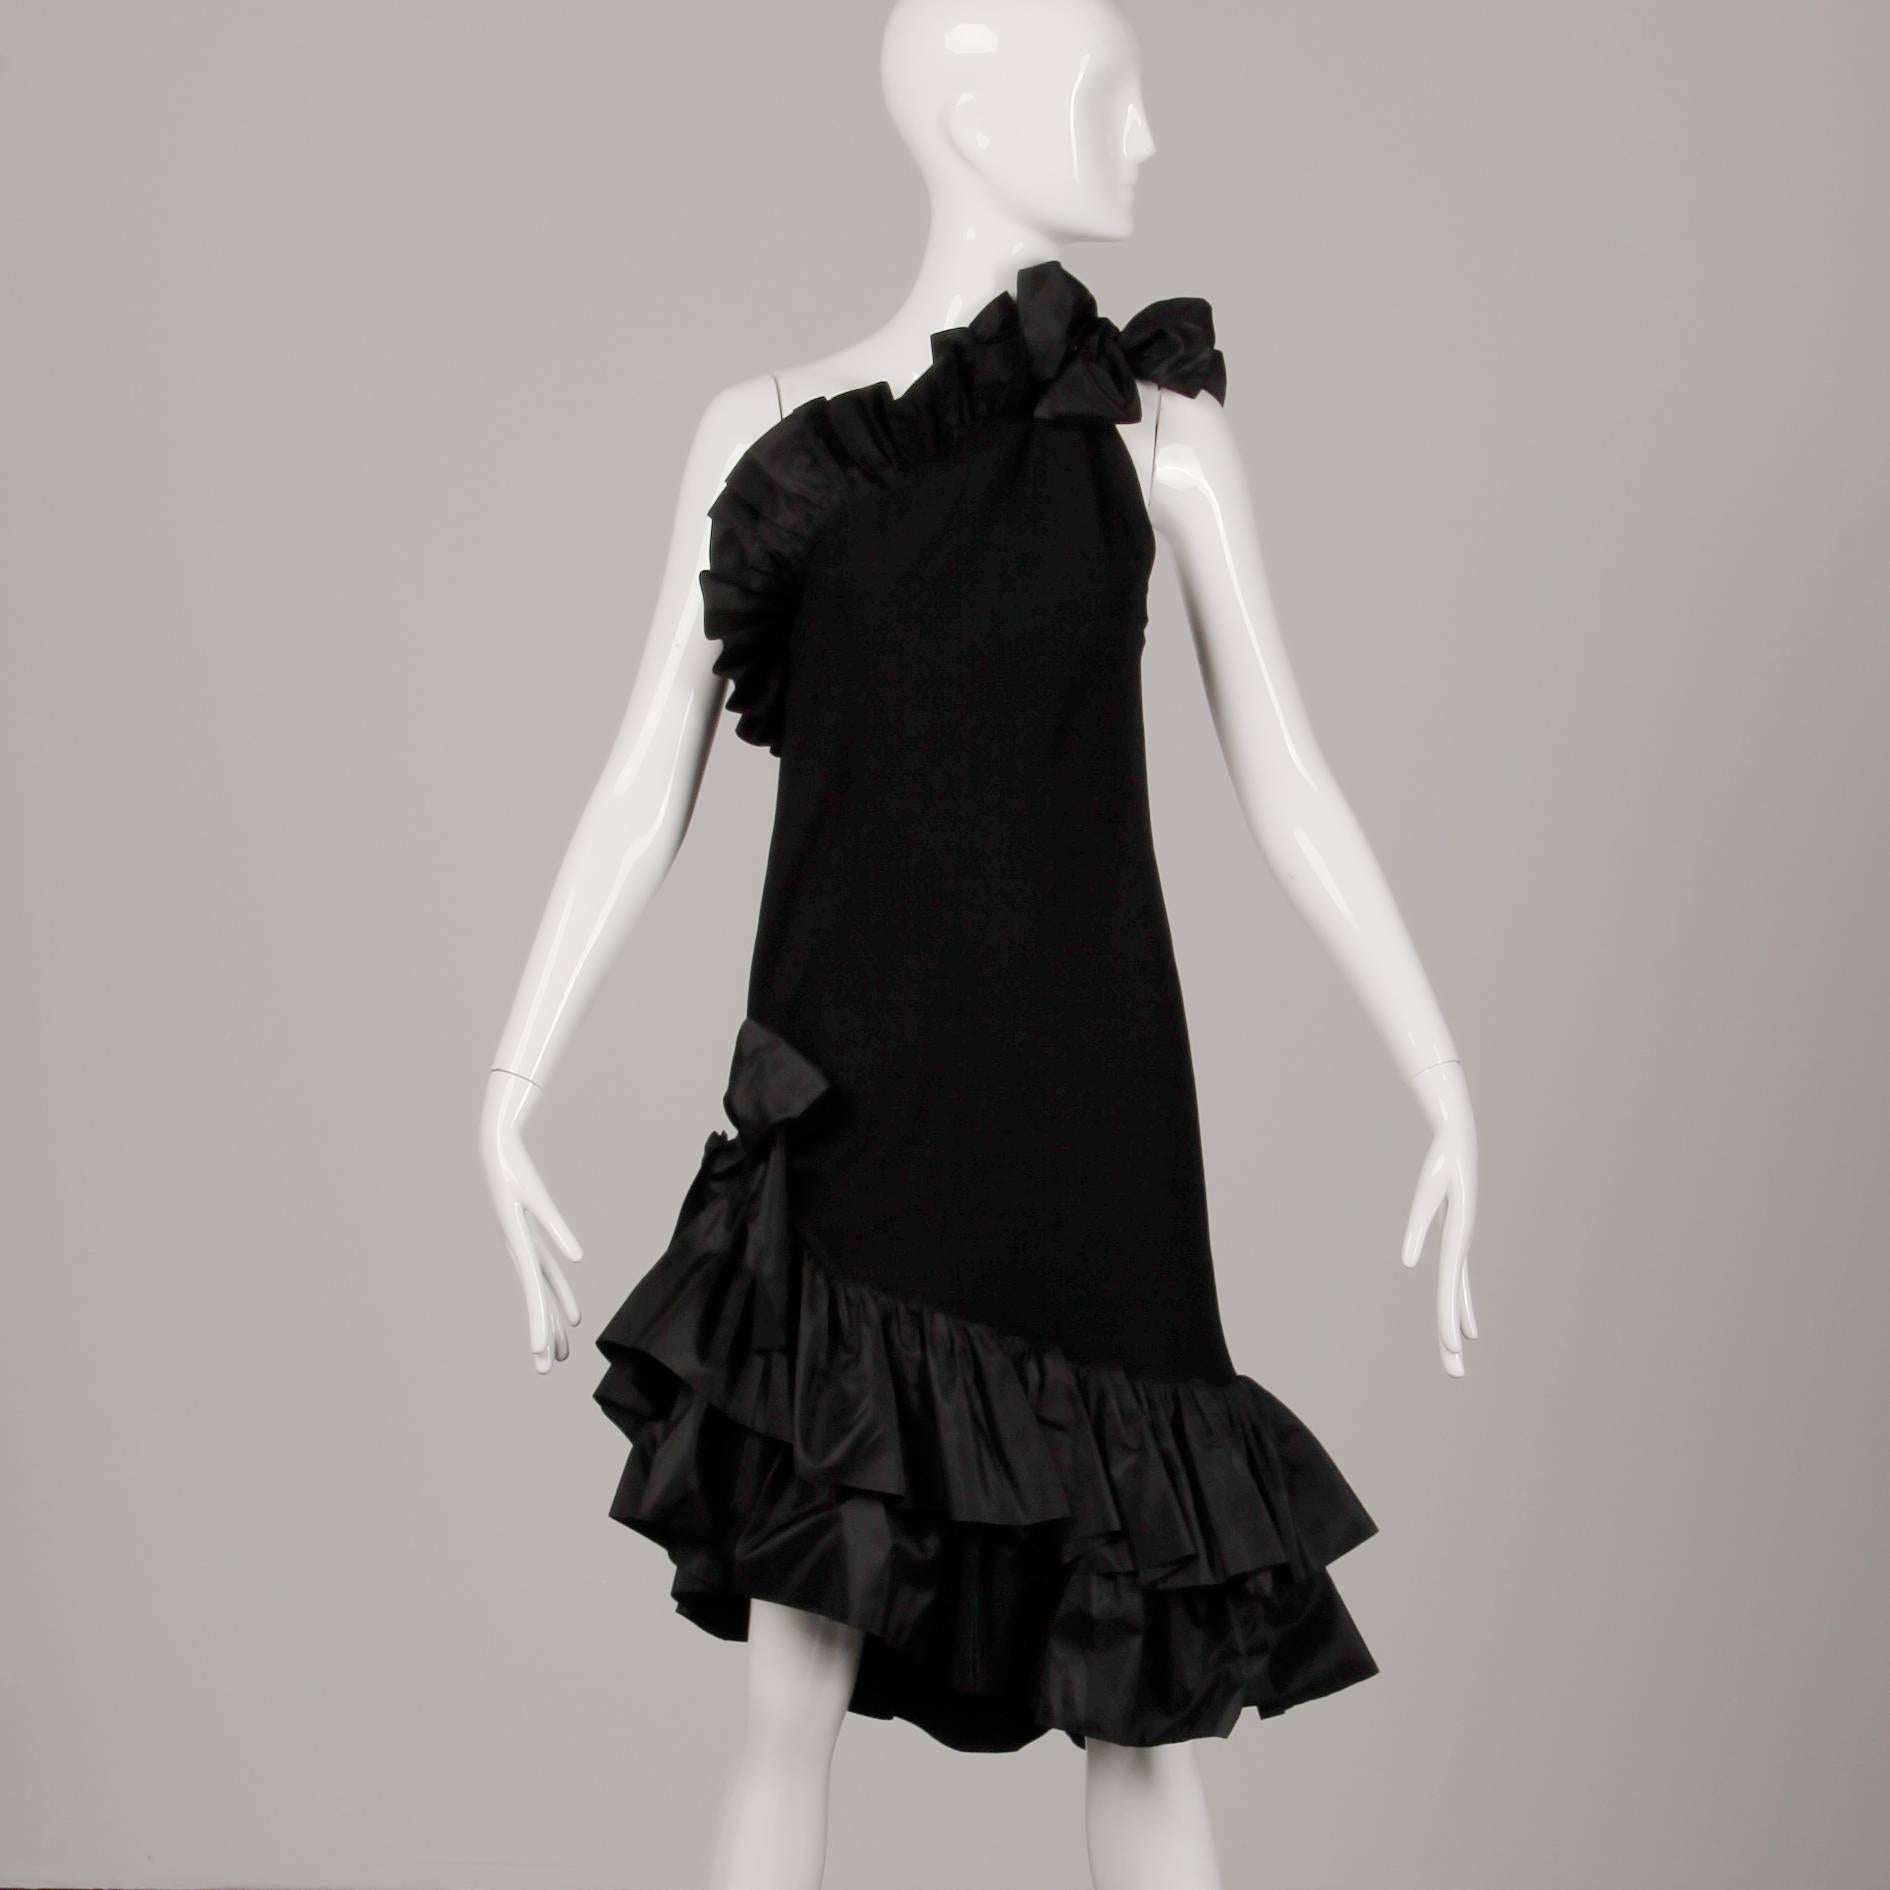 Chic 1980s vintage black ruffled evening dress with one-shoulder tie by Yves Saint Laurent. Unlined with no closure (pulls on over the head). 72% Acetate, 28% viscose. The marked size is 38/ US 6 / Small. The bust measures 40